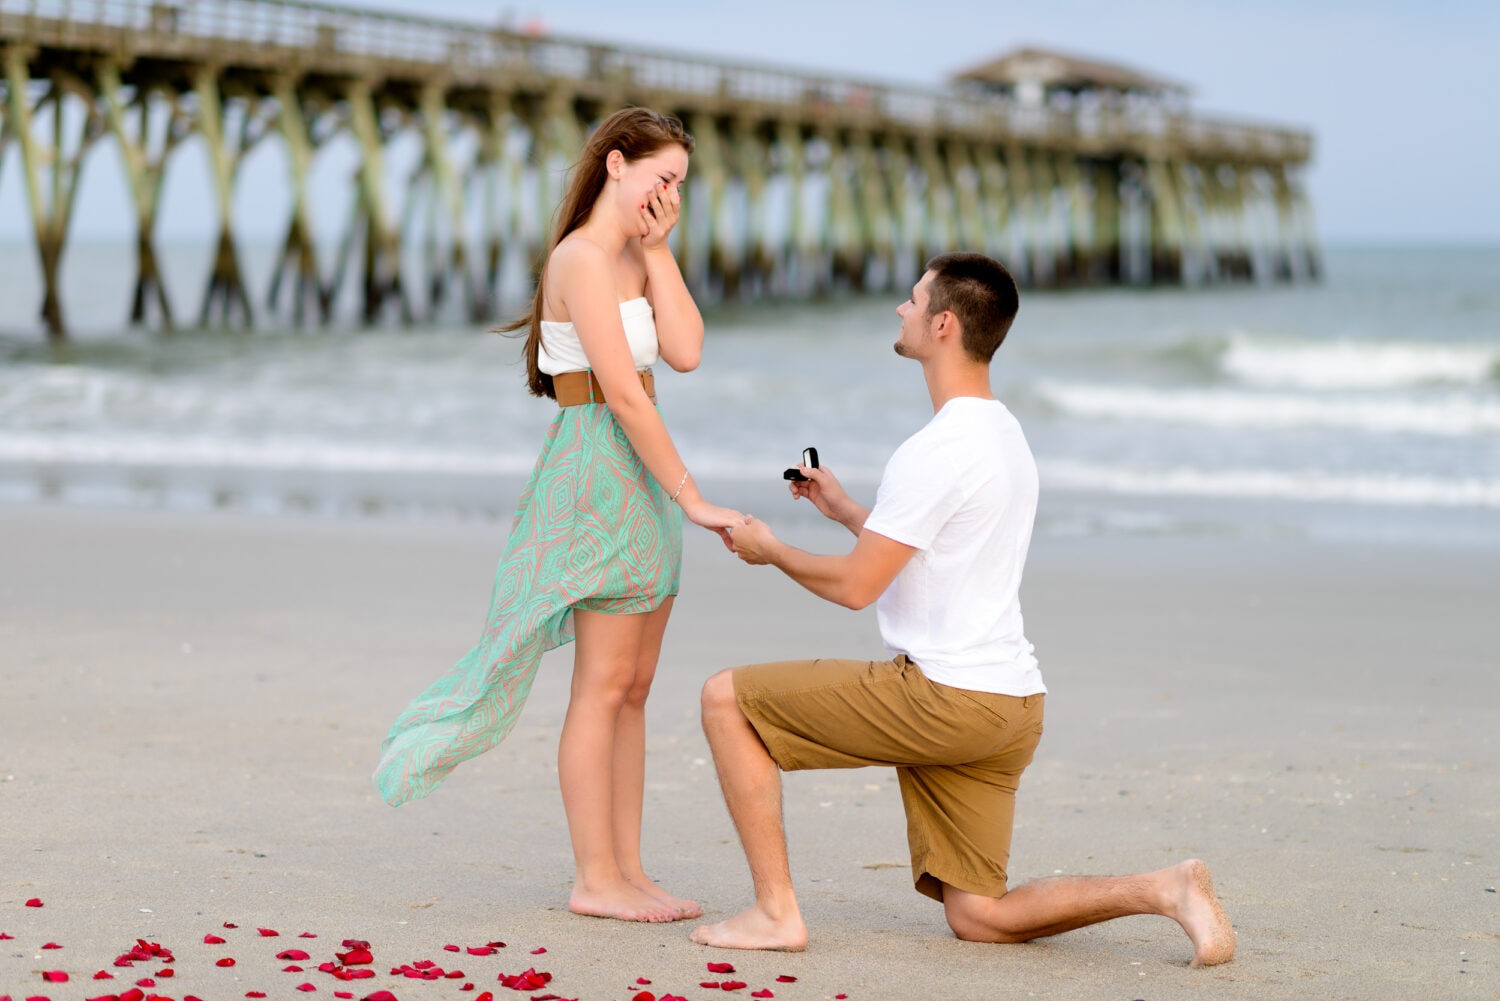 Down on a knee for marriage proposal in front of ocean - Myrtle Beach Ocean